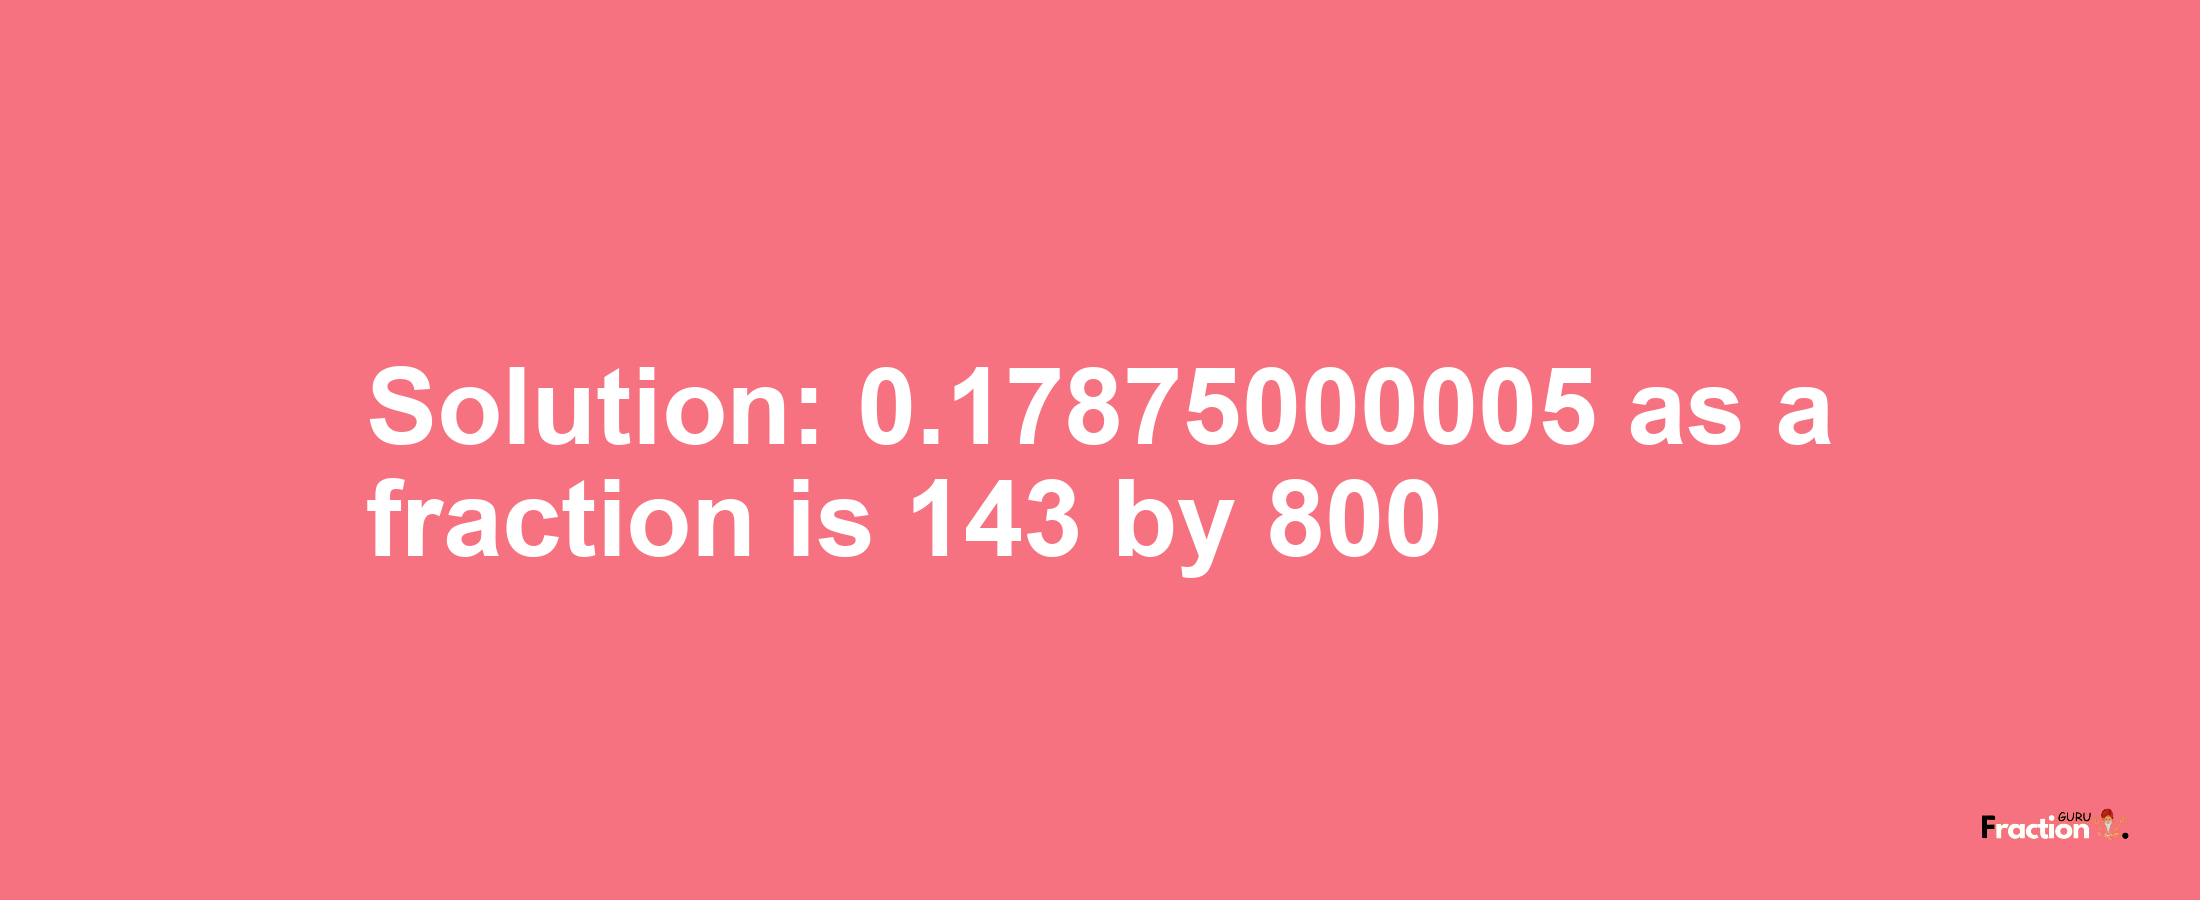 Solution:0.17875000005 as a fraction is 143/800